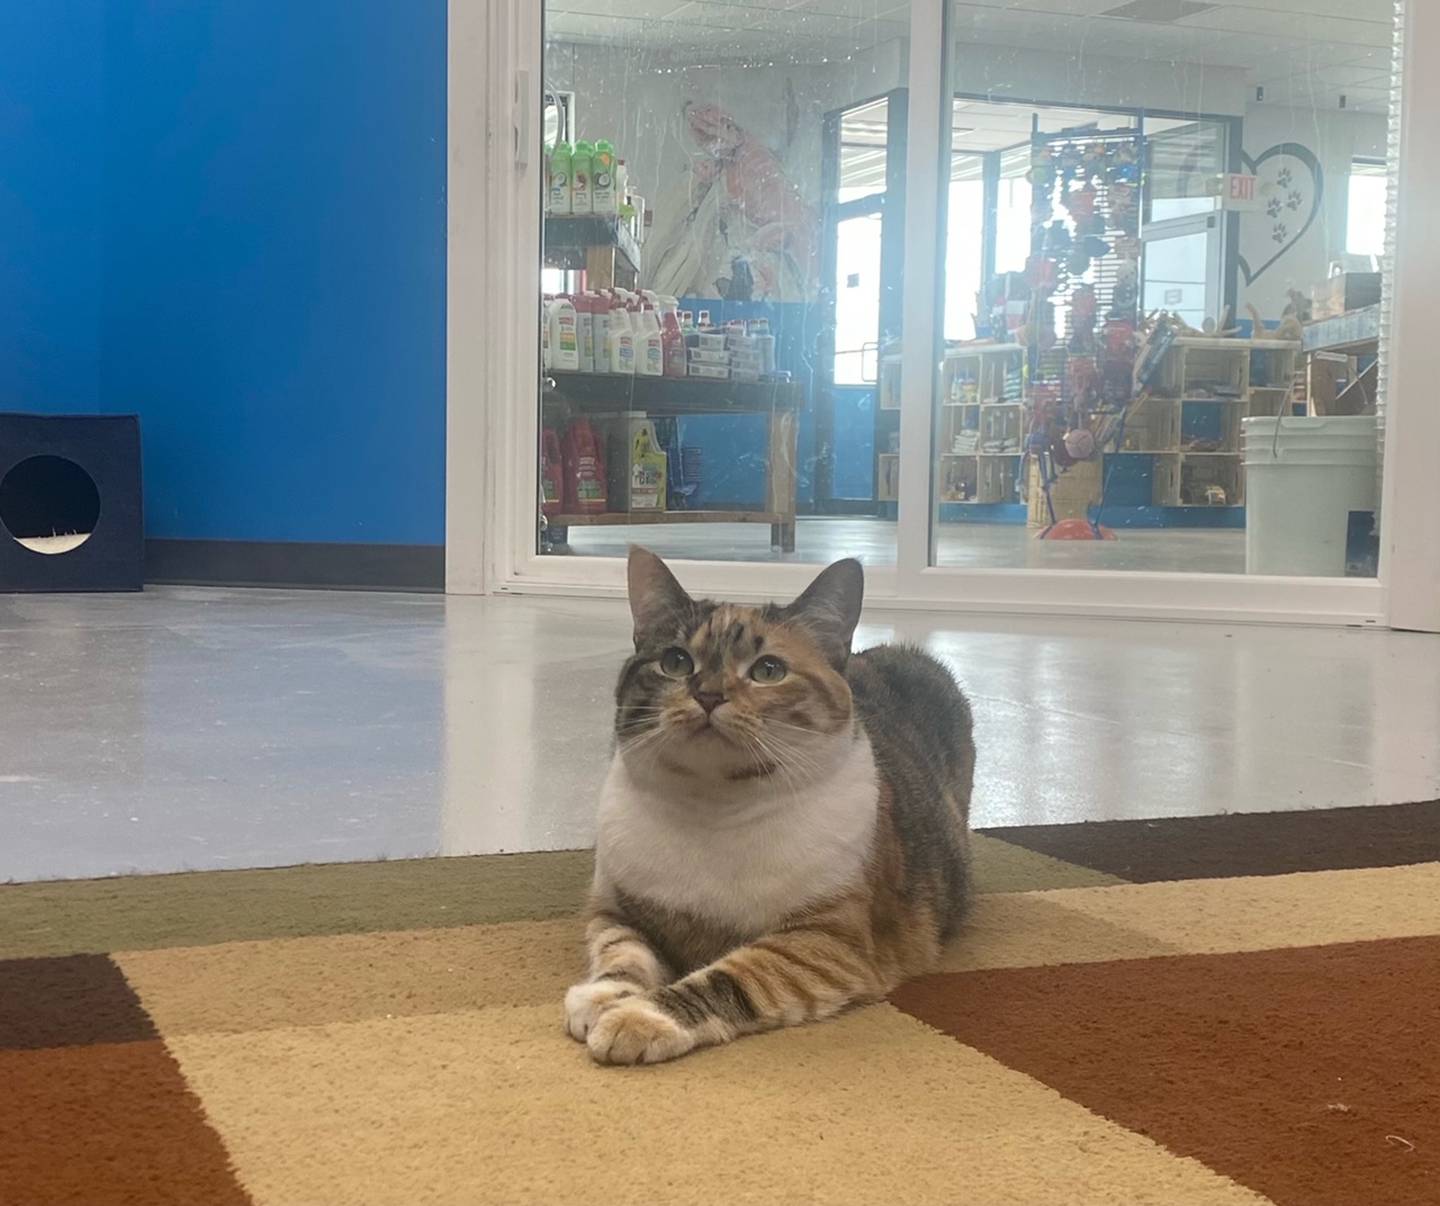 Sirenia is a playful tabby looking for a new home. She is good with other cats and does well with children. To meet Sirenia, contact Forepaws at megan@forepawspets.com. Visit https://www.forepawspets.com/